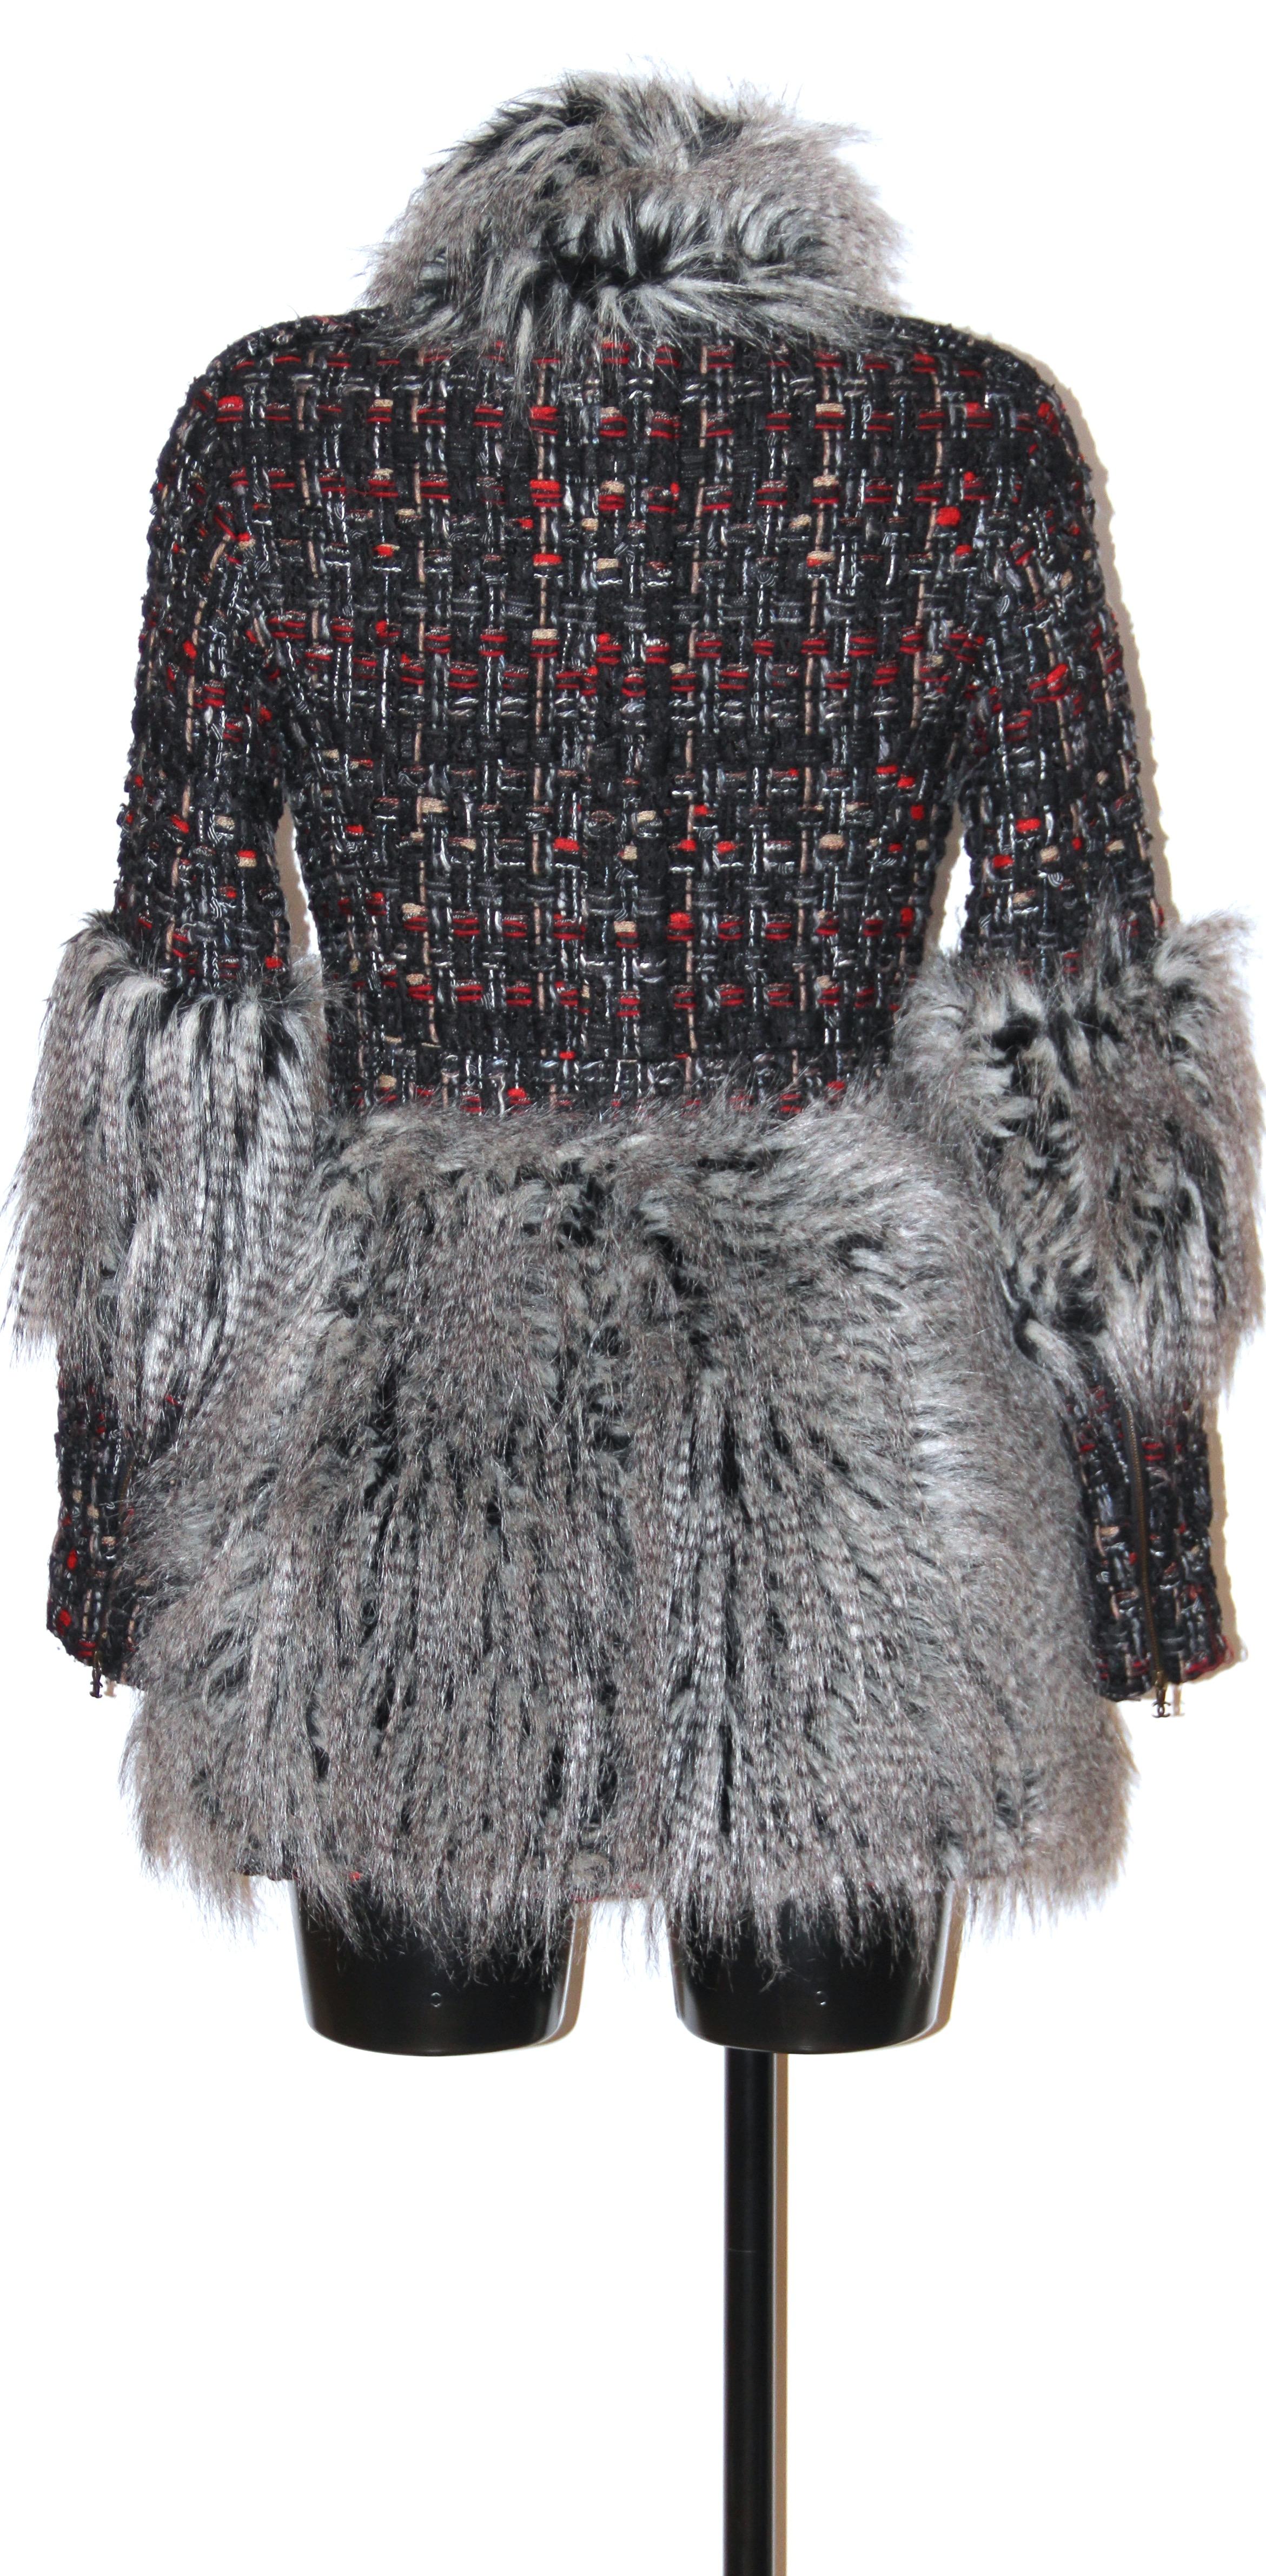 This pre-owned very interesting long jacket from Chanel is made of a black and red multicolored tweed.
Grey faux-fur is woven into the tweed, forming deep pelmets on the lower half of the jacket as well as aroung the cuffs and the collar.
A hidden